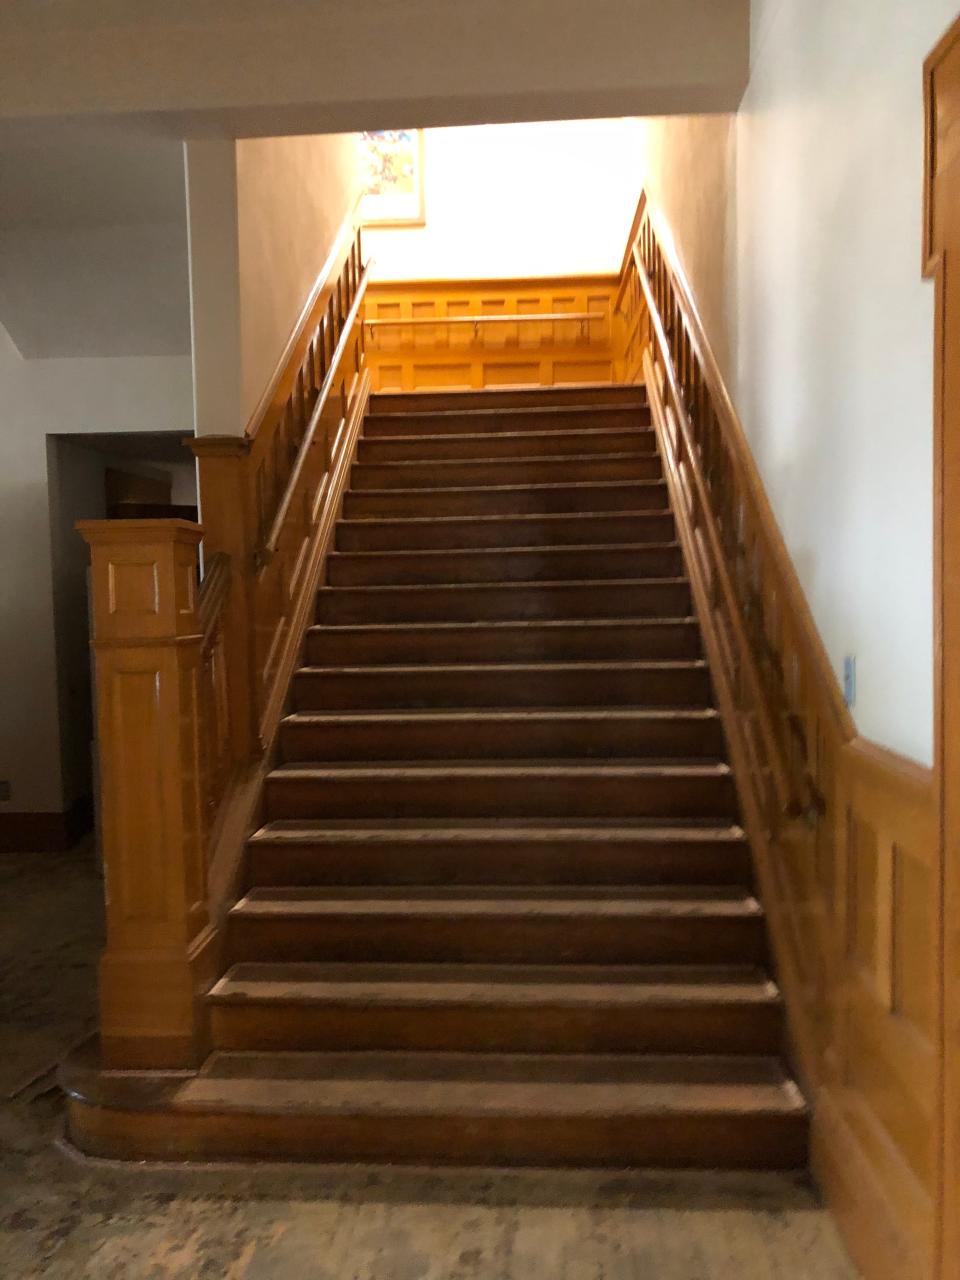 The beautiful stairway in the Bivins Home was actually facing east, in line with the front door, according to earlier information. This shows the bare floor which is being covered with period correct carpet.